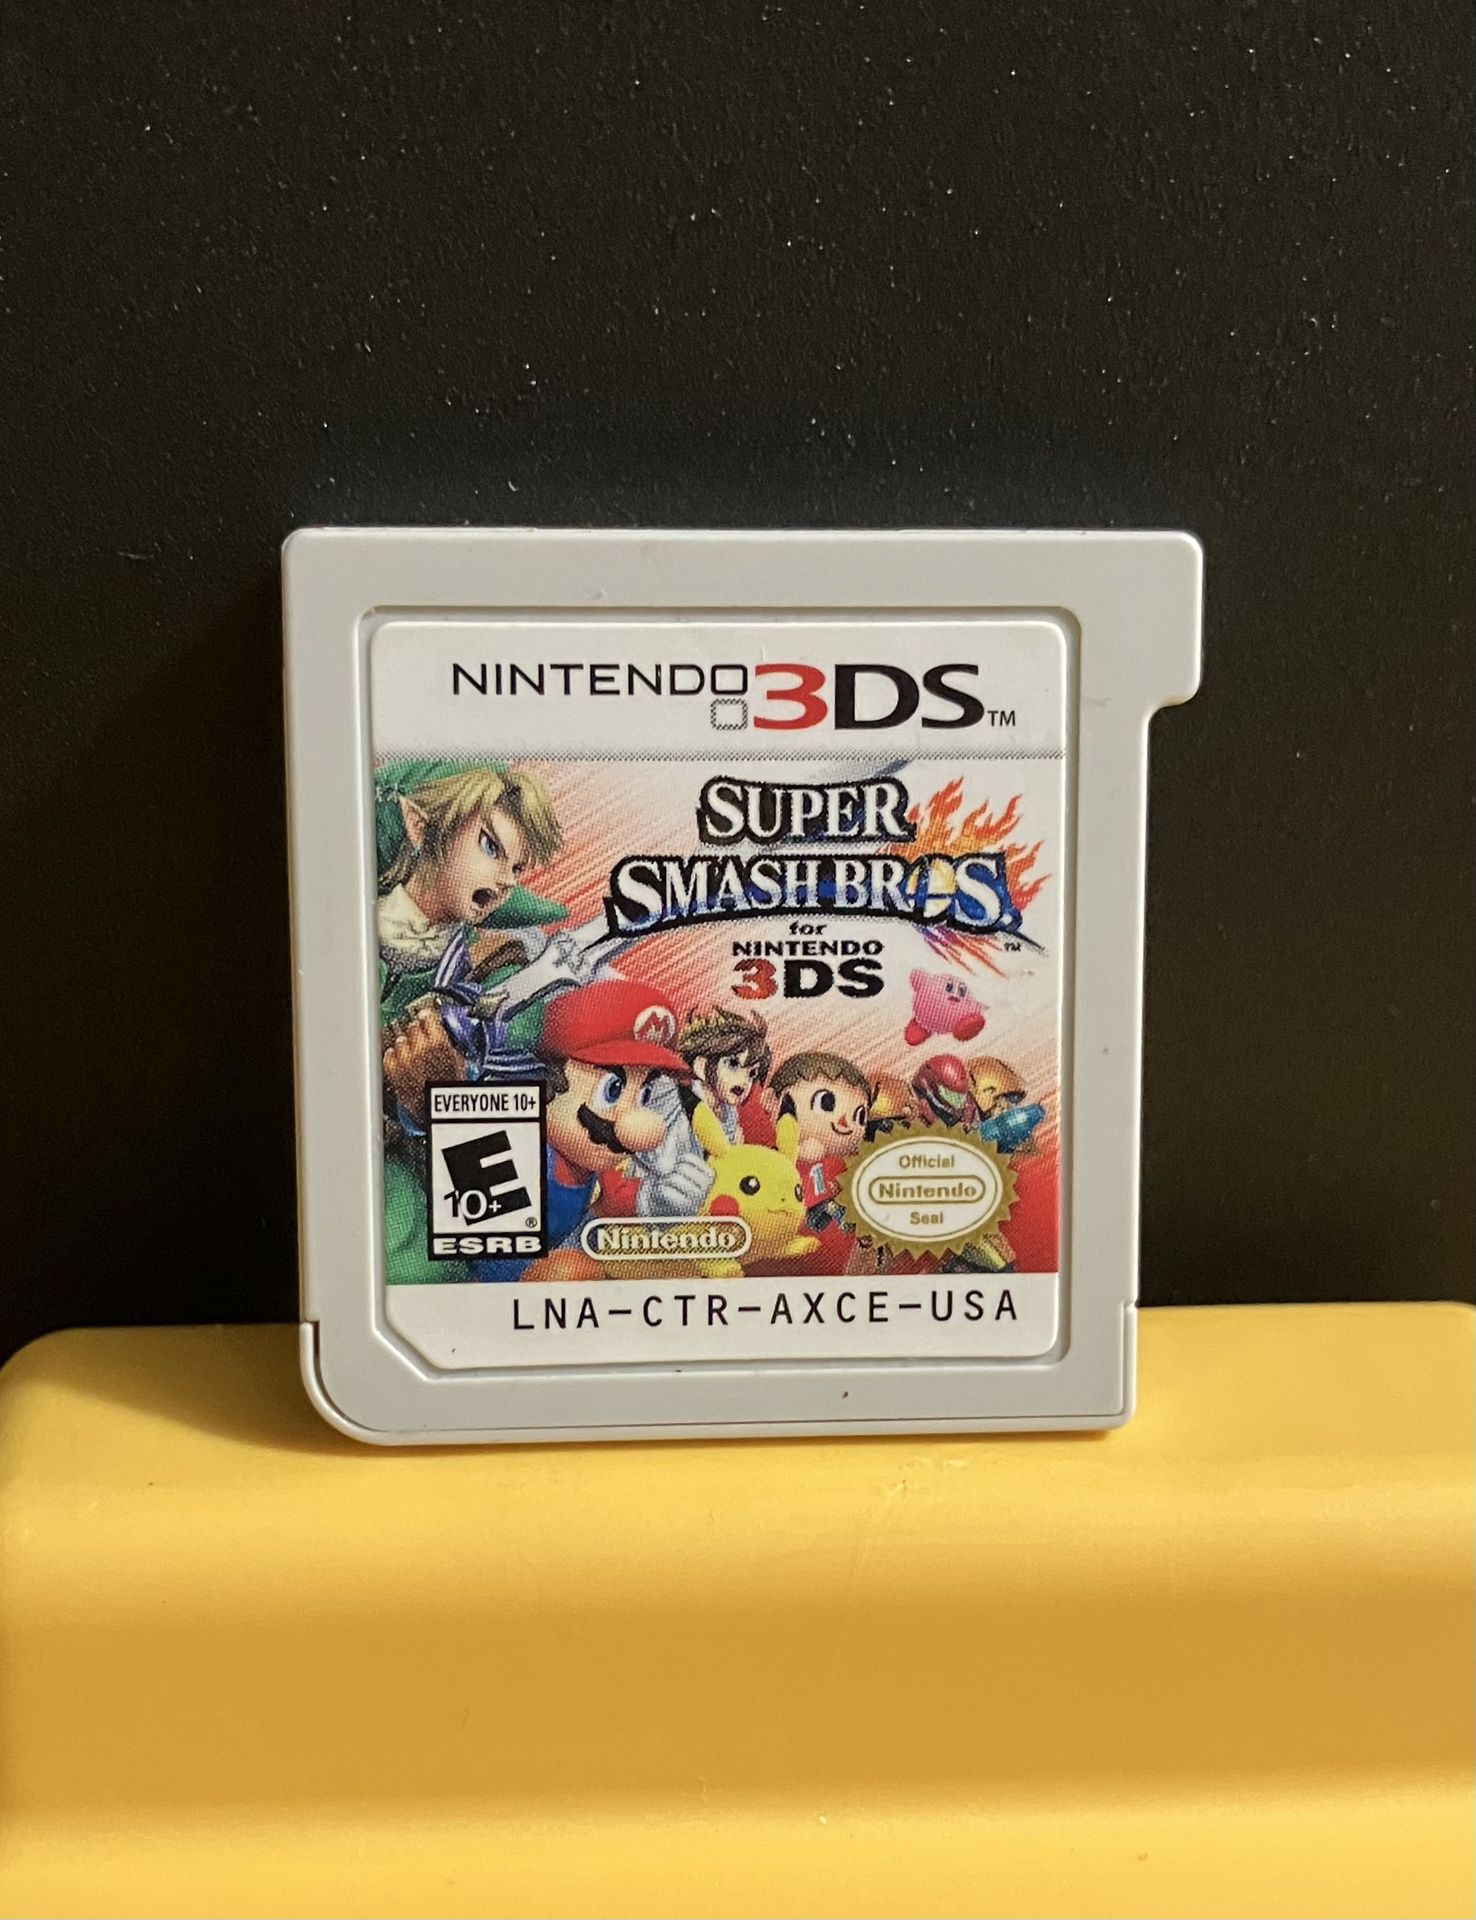 Super Smash Bros for Nintendo 3ds video game console system or XL New brothers 2ds